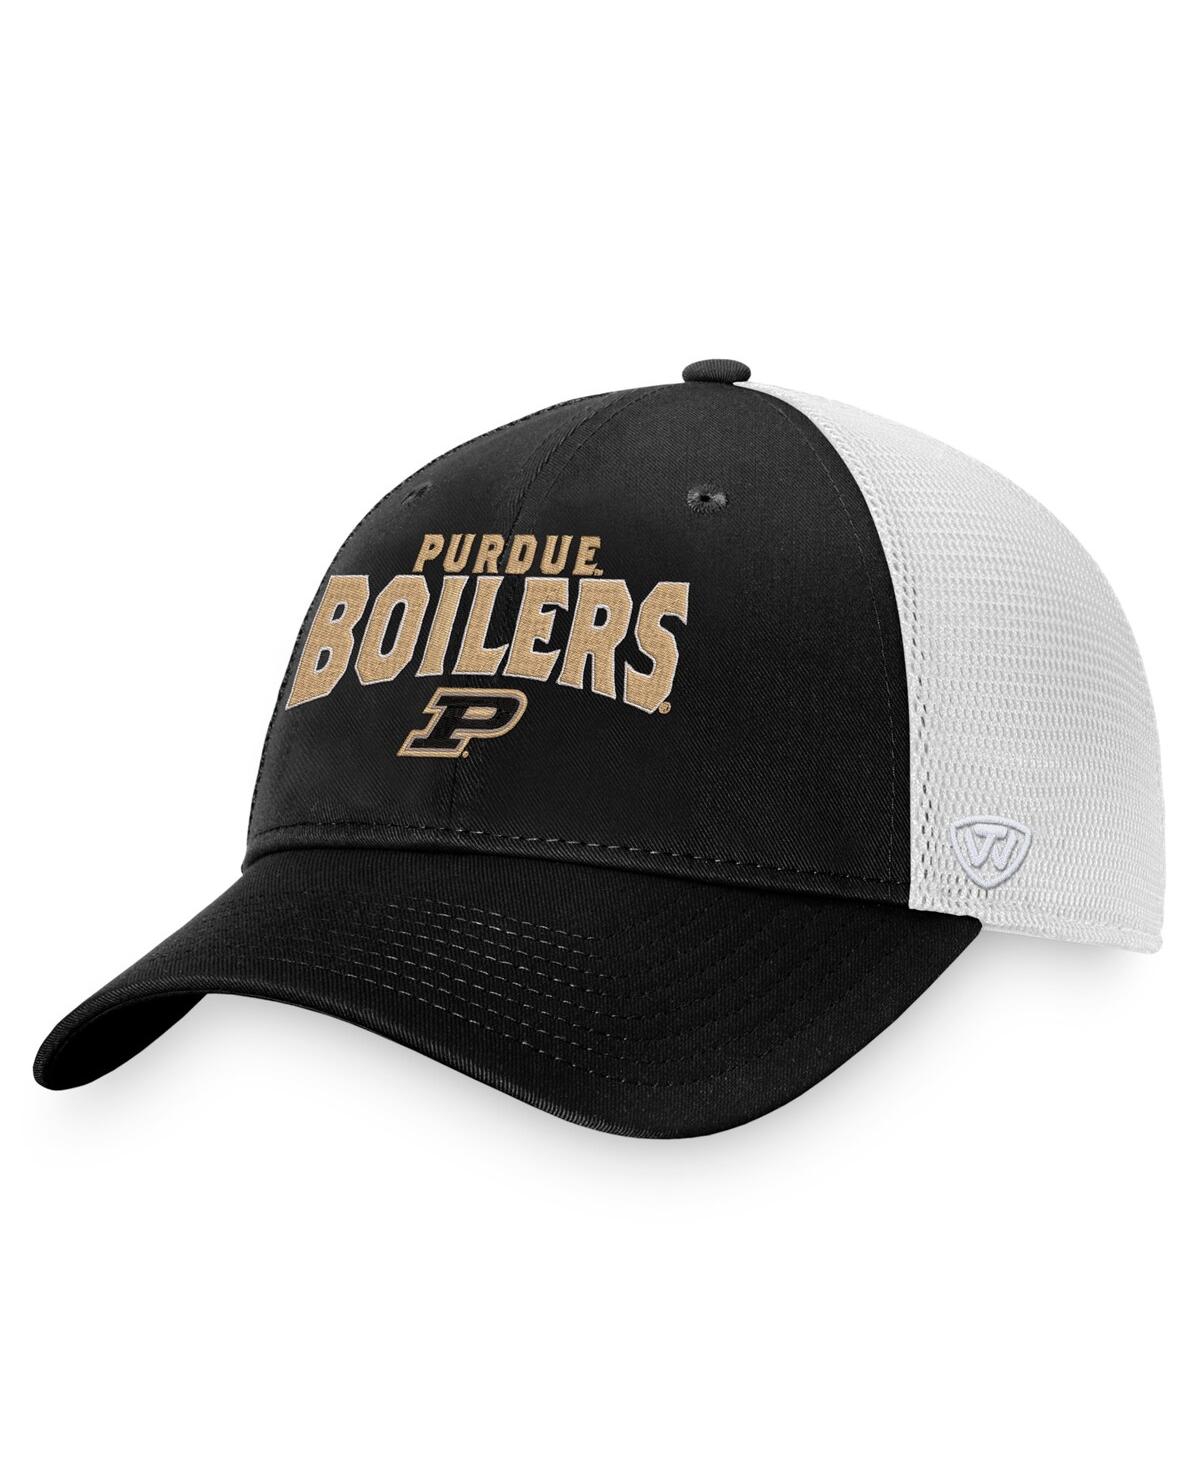 TOP OF THE WORLD MEN'S TOP OF THE WORLD BLACK, WHITE PURDUE BOILERMAKERS BREAKOUT TRUCKER SNAPBACK HAT